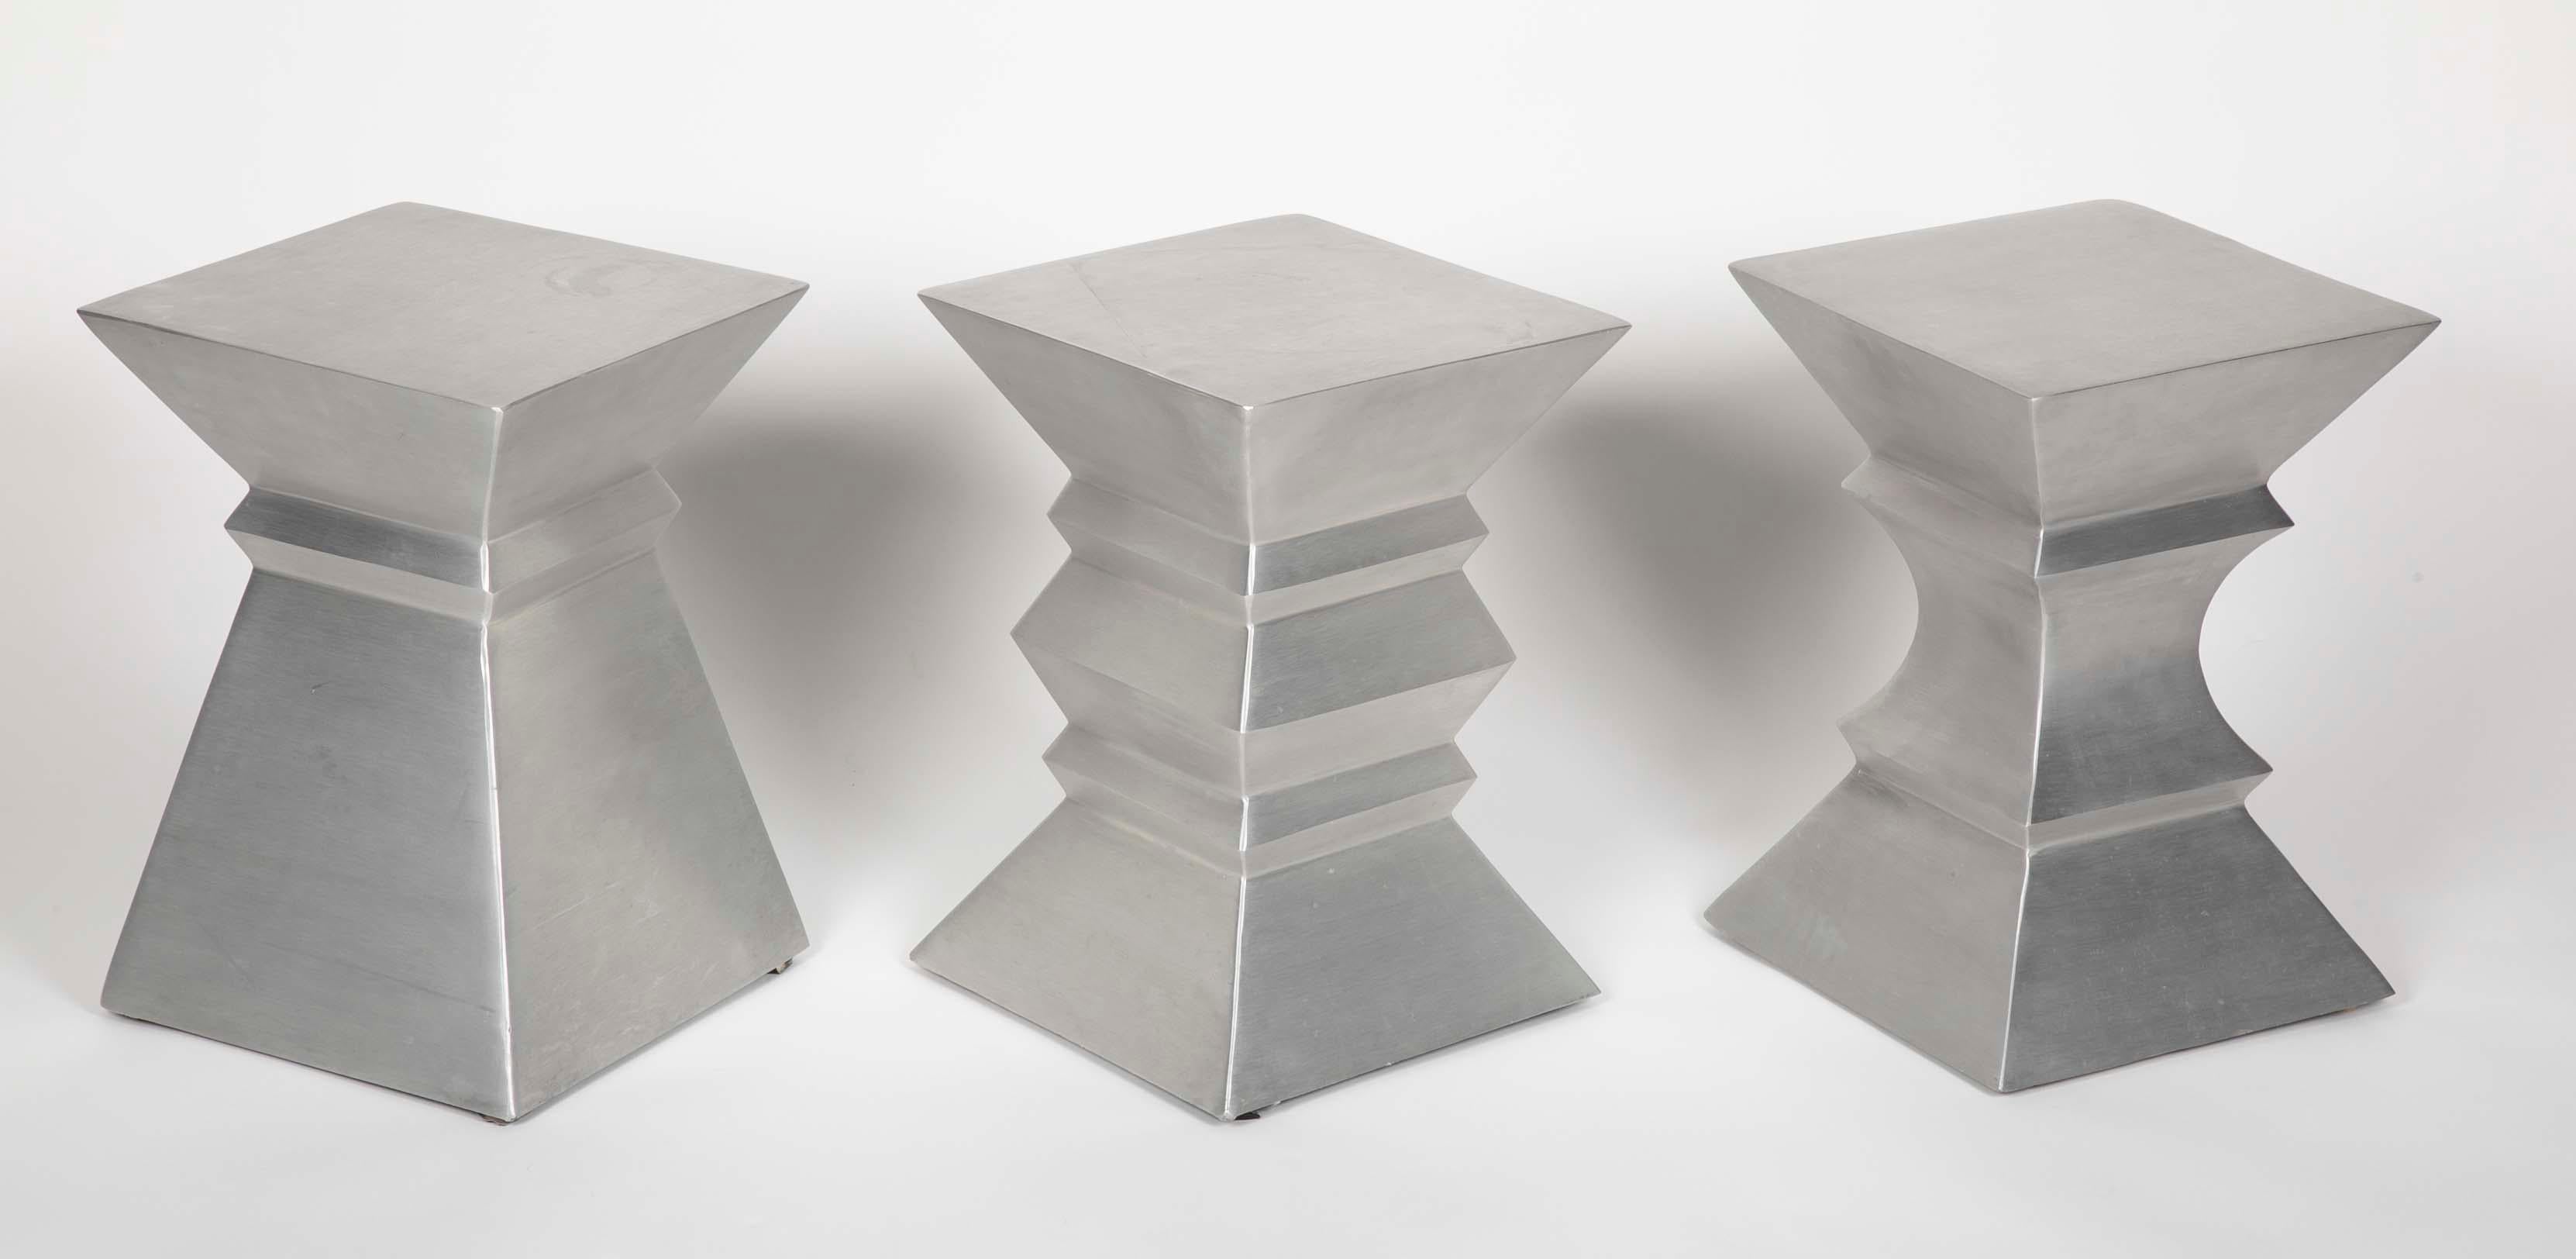 Set of three very stylish aluminum side tables in elegant geometric form. In the style of sculptor Constantin Brancusi. Will make unique side or drinks tables or pedestals. Or the three together as an alternative coffee table.